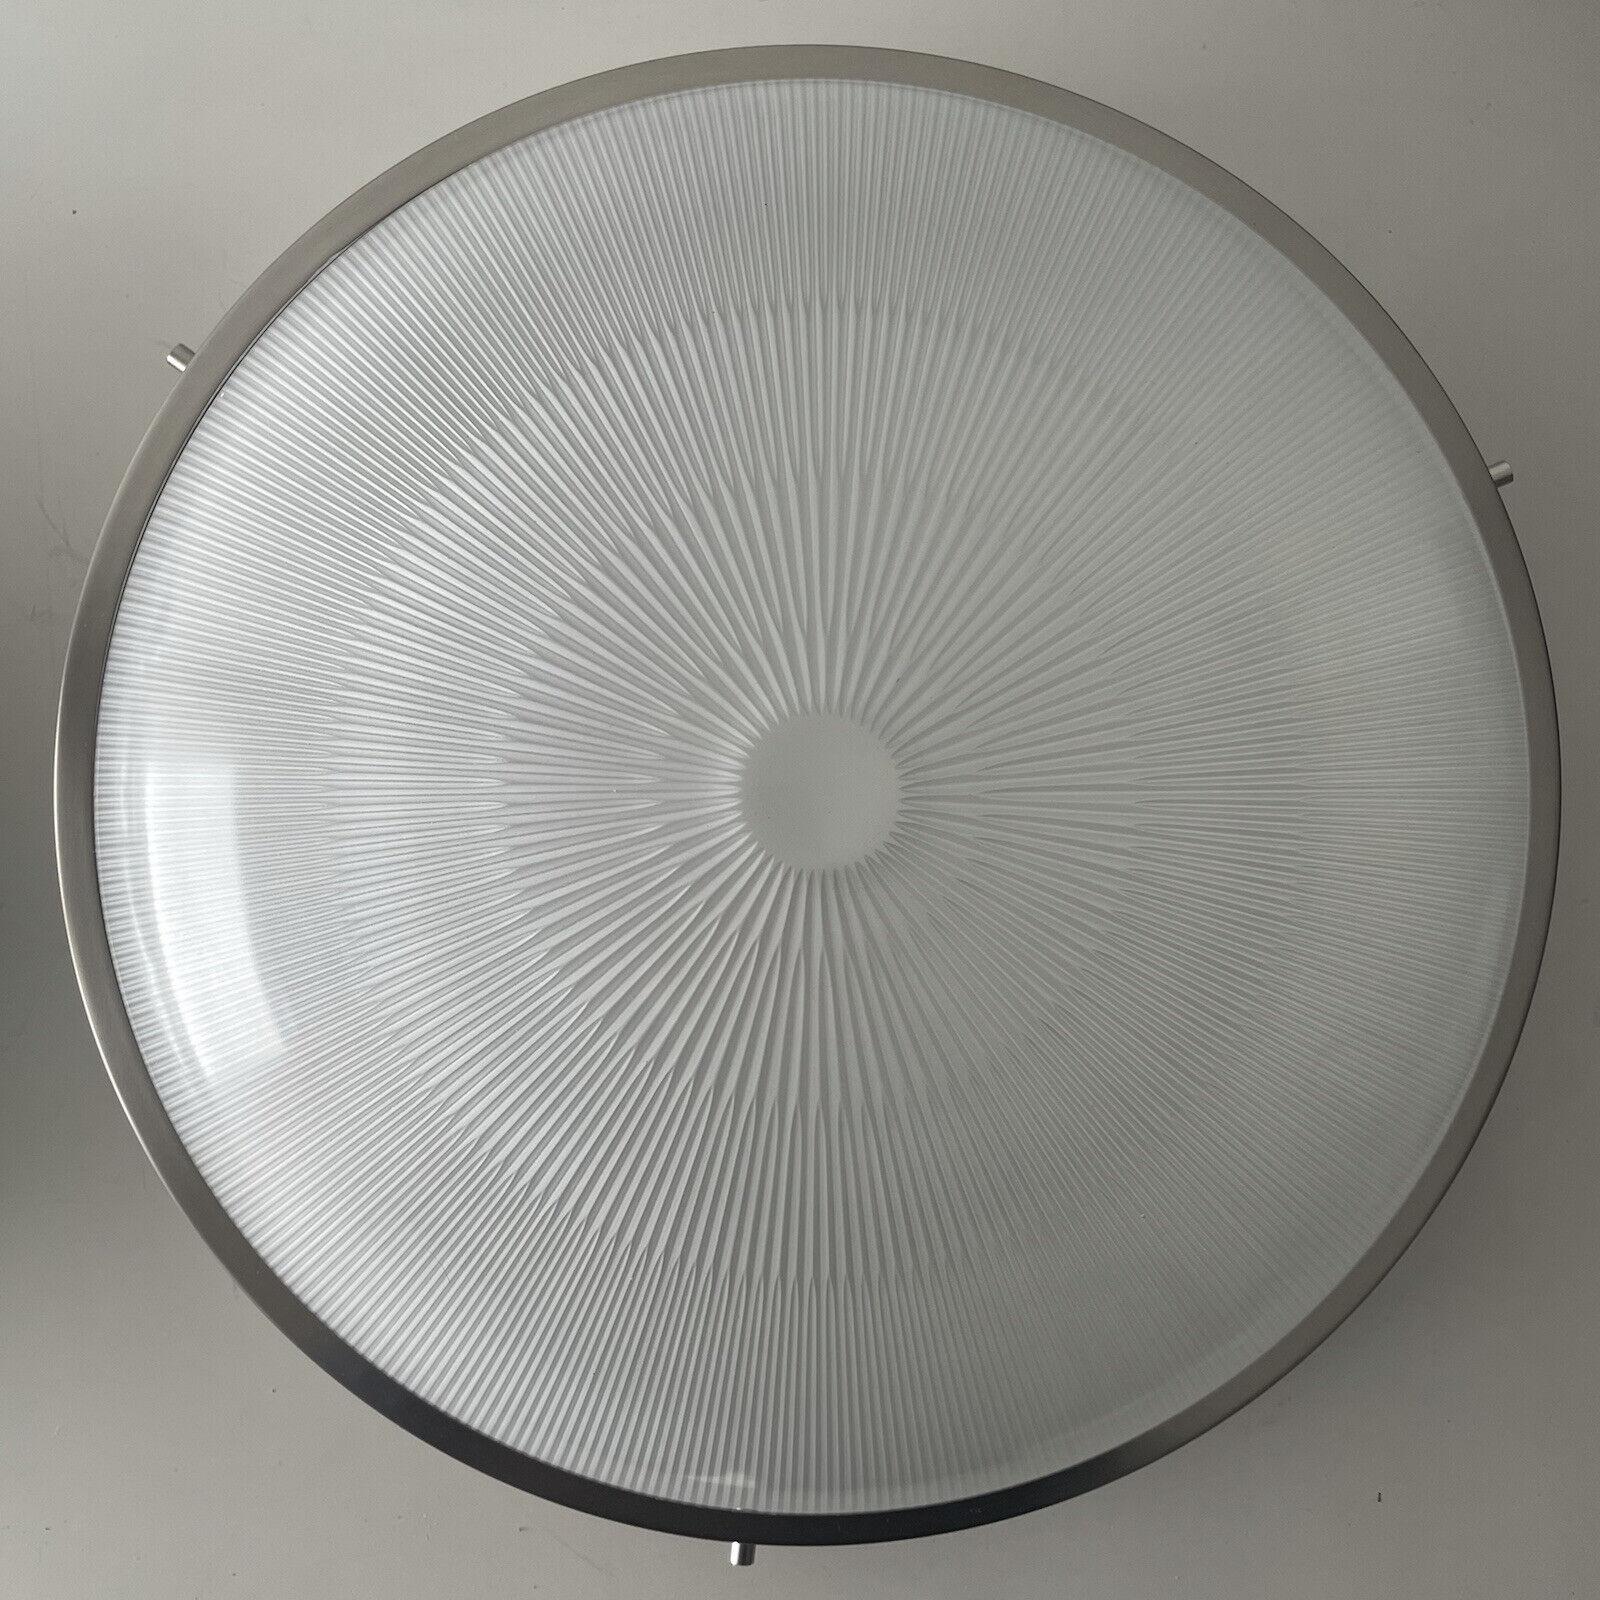 Mid-Century Modern Stunning Sigma Lamp Model Designed by Sergio Mazza for Artemide in the, 1960s For Sale